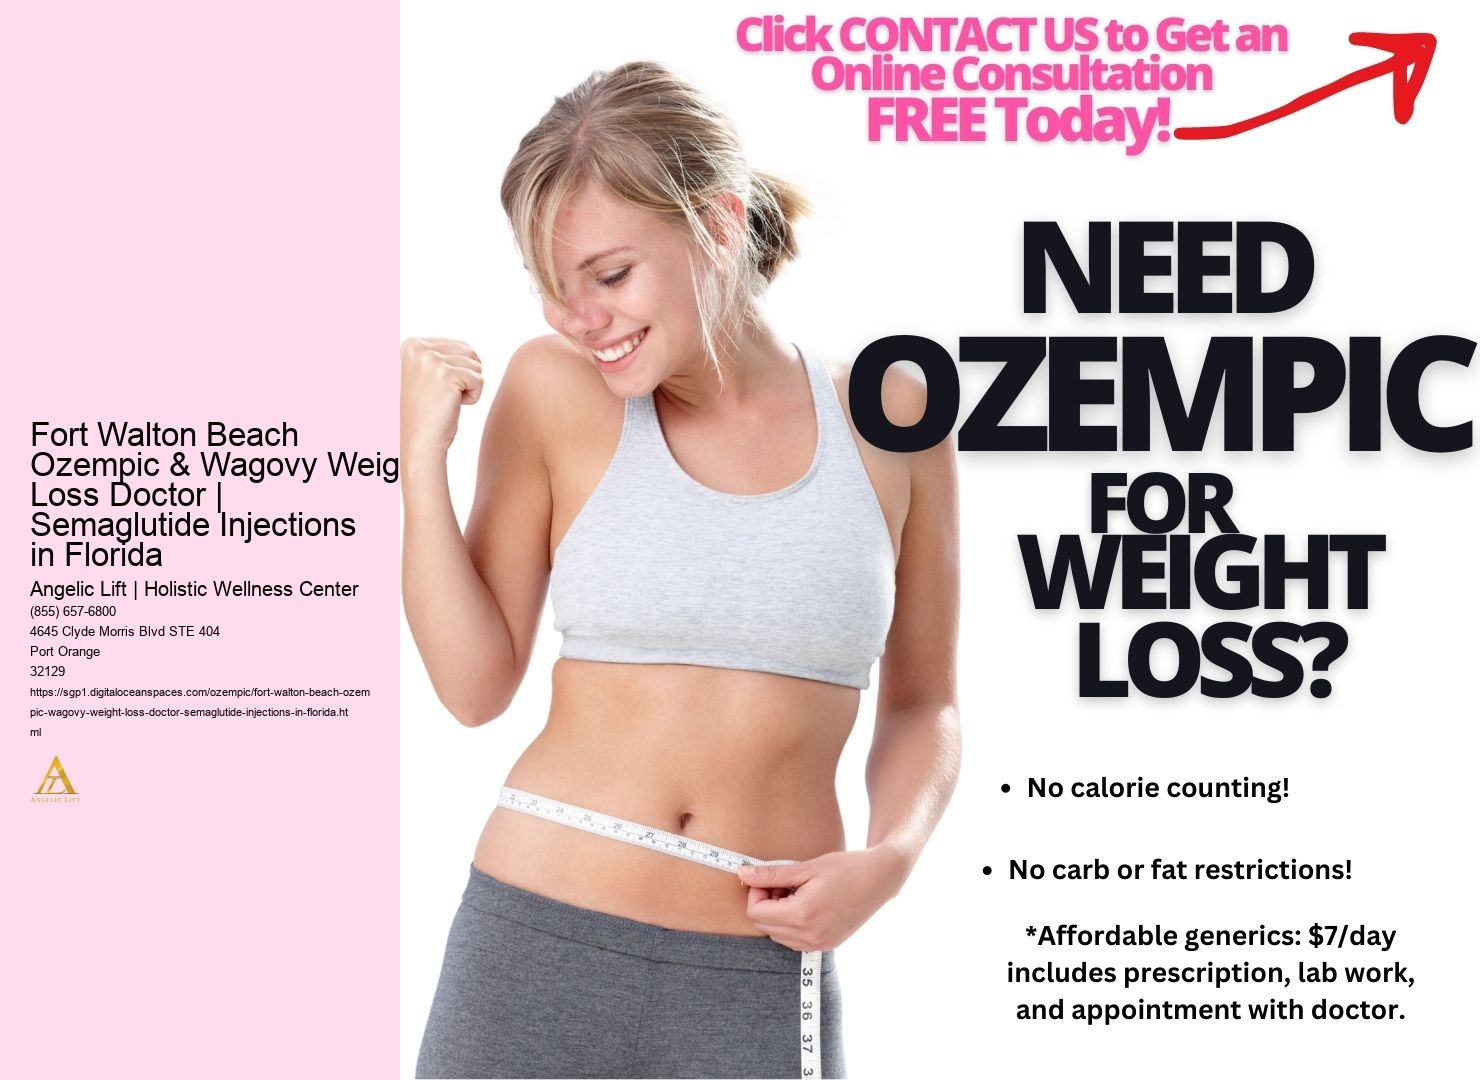 Fort Walton Beach Ozempic & Wagovy Weight Loss Doctor | Semaglutide Injections in Florida